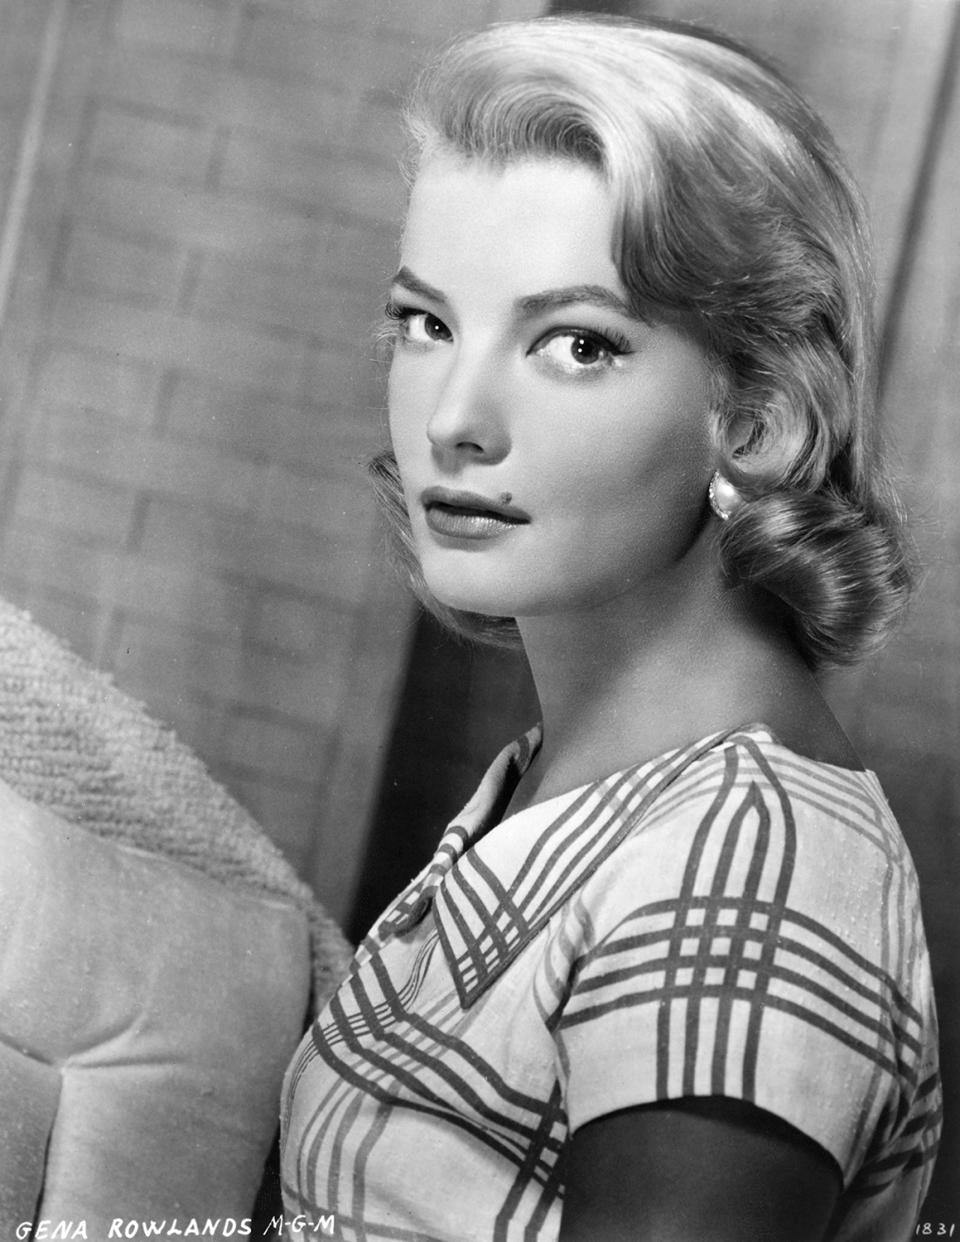 Gena Rowlands' Life Before Acting